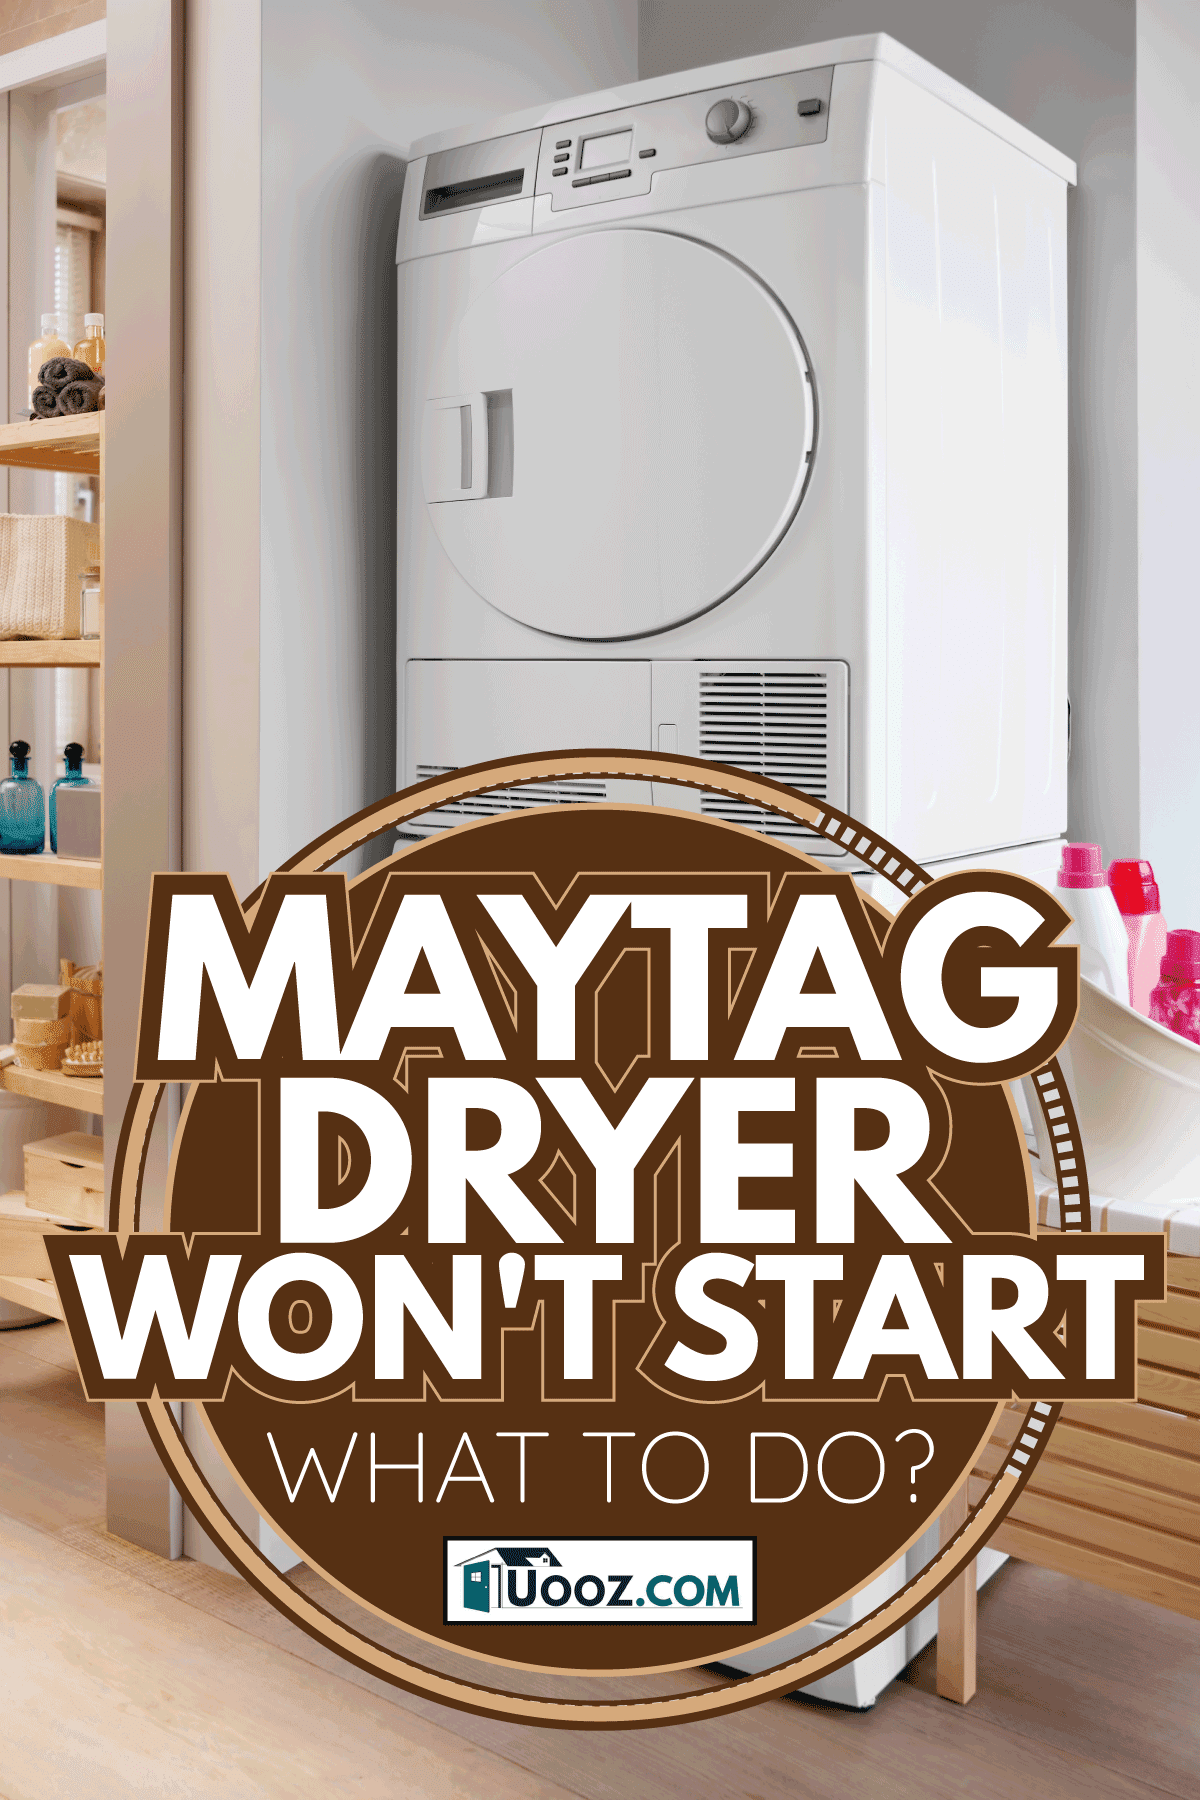 Washing machine and dryer in the bathroom. Maytag Dryer Won't Start - What To Do